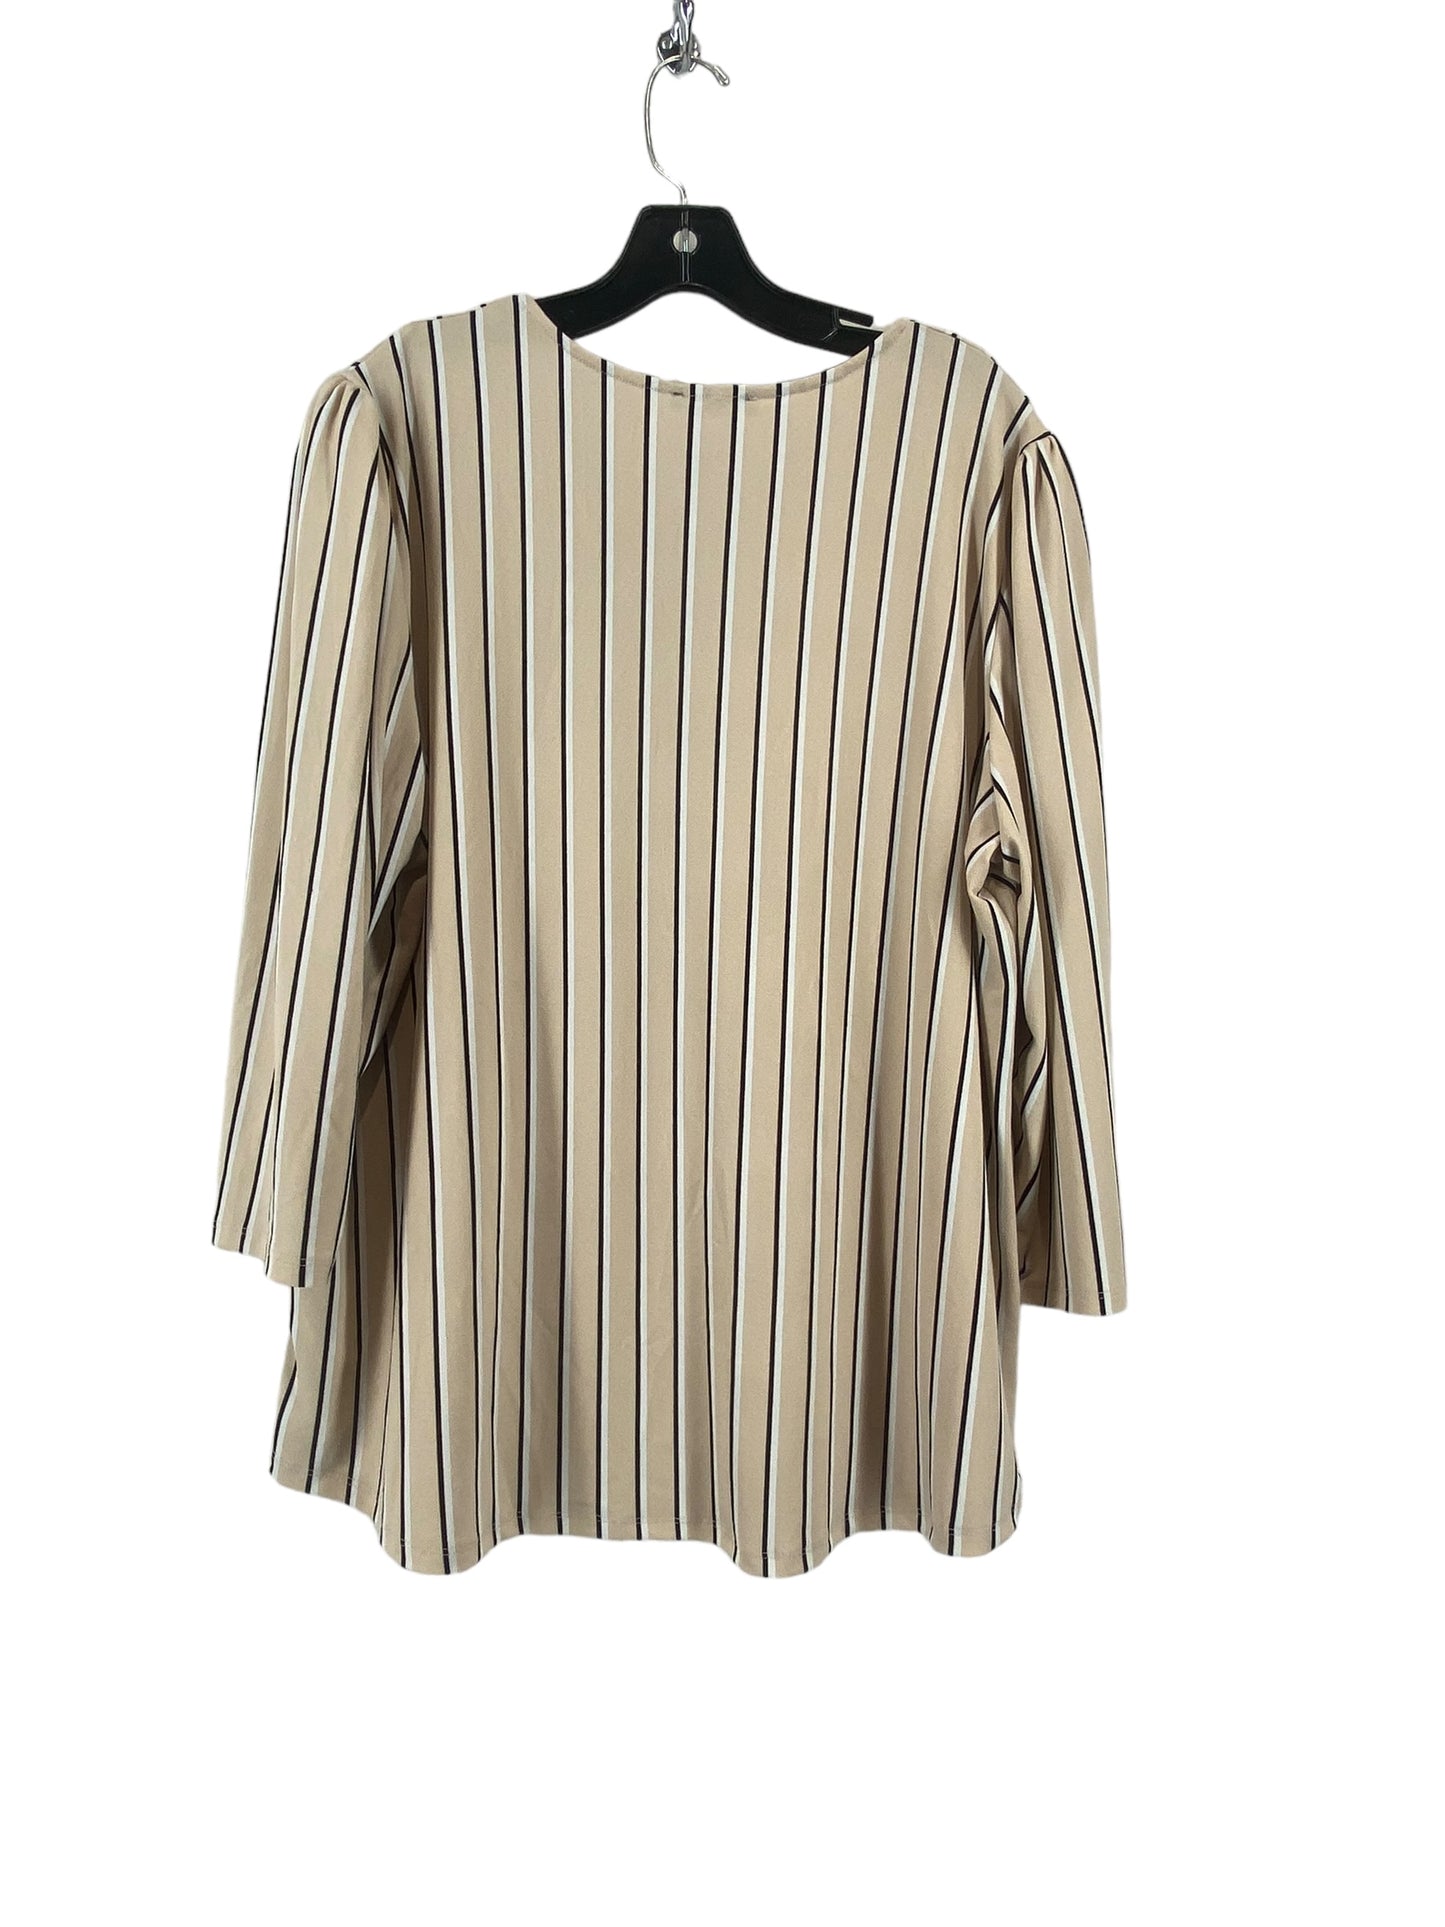 Striped Pattern Top 3/4 Sleeve Adrianna Papell, Size 1x